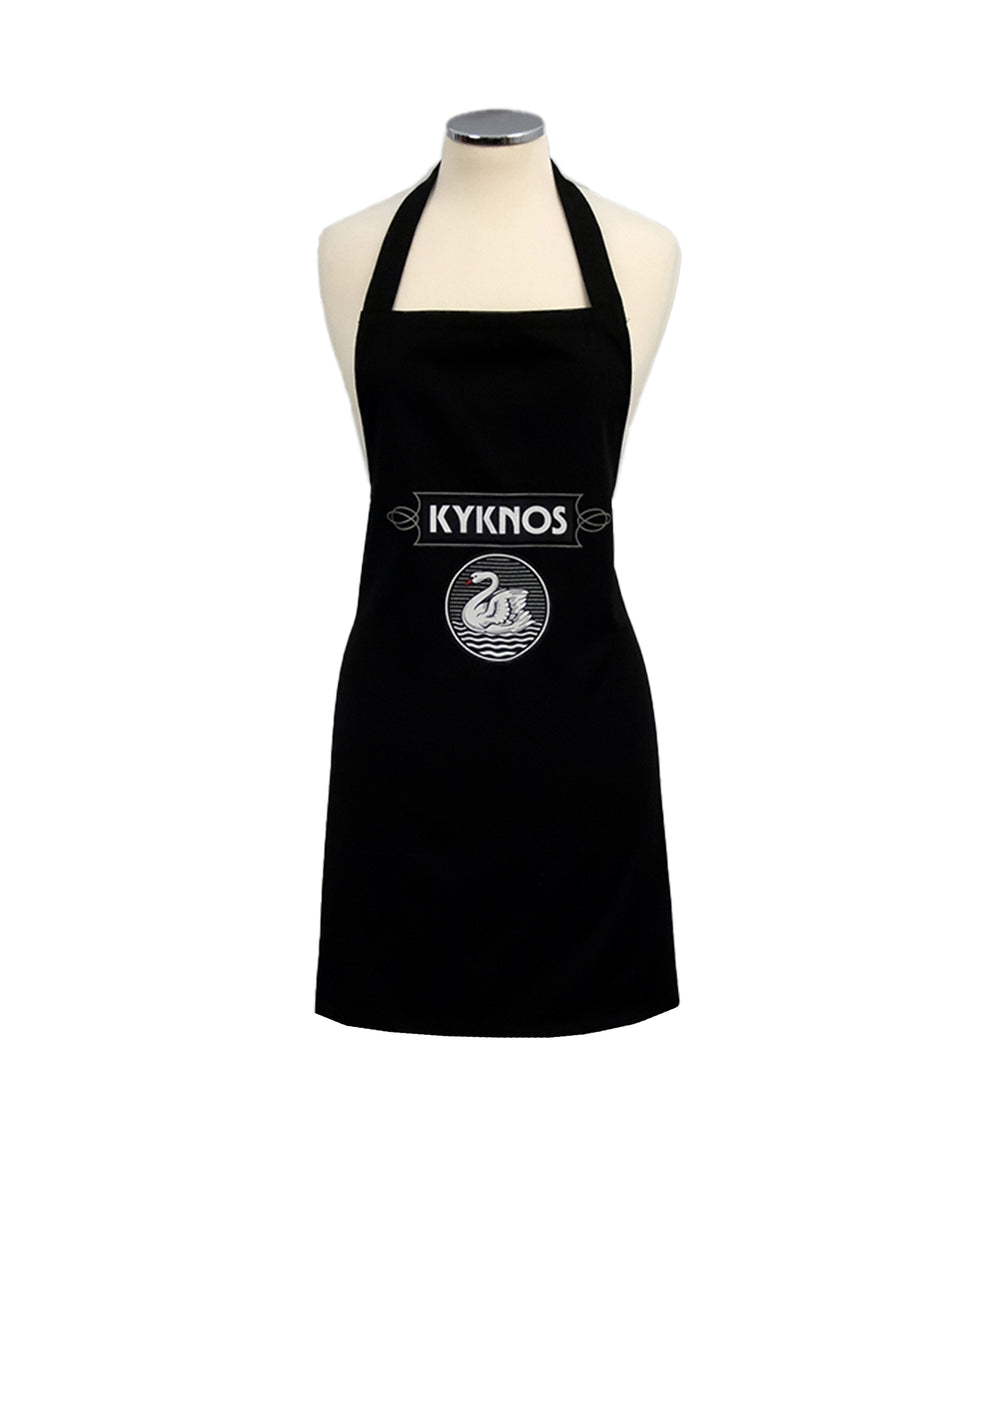 Apron with KYKNOS logo